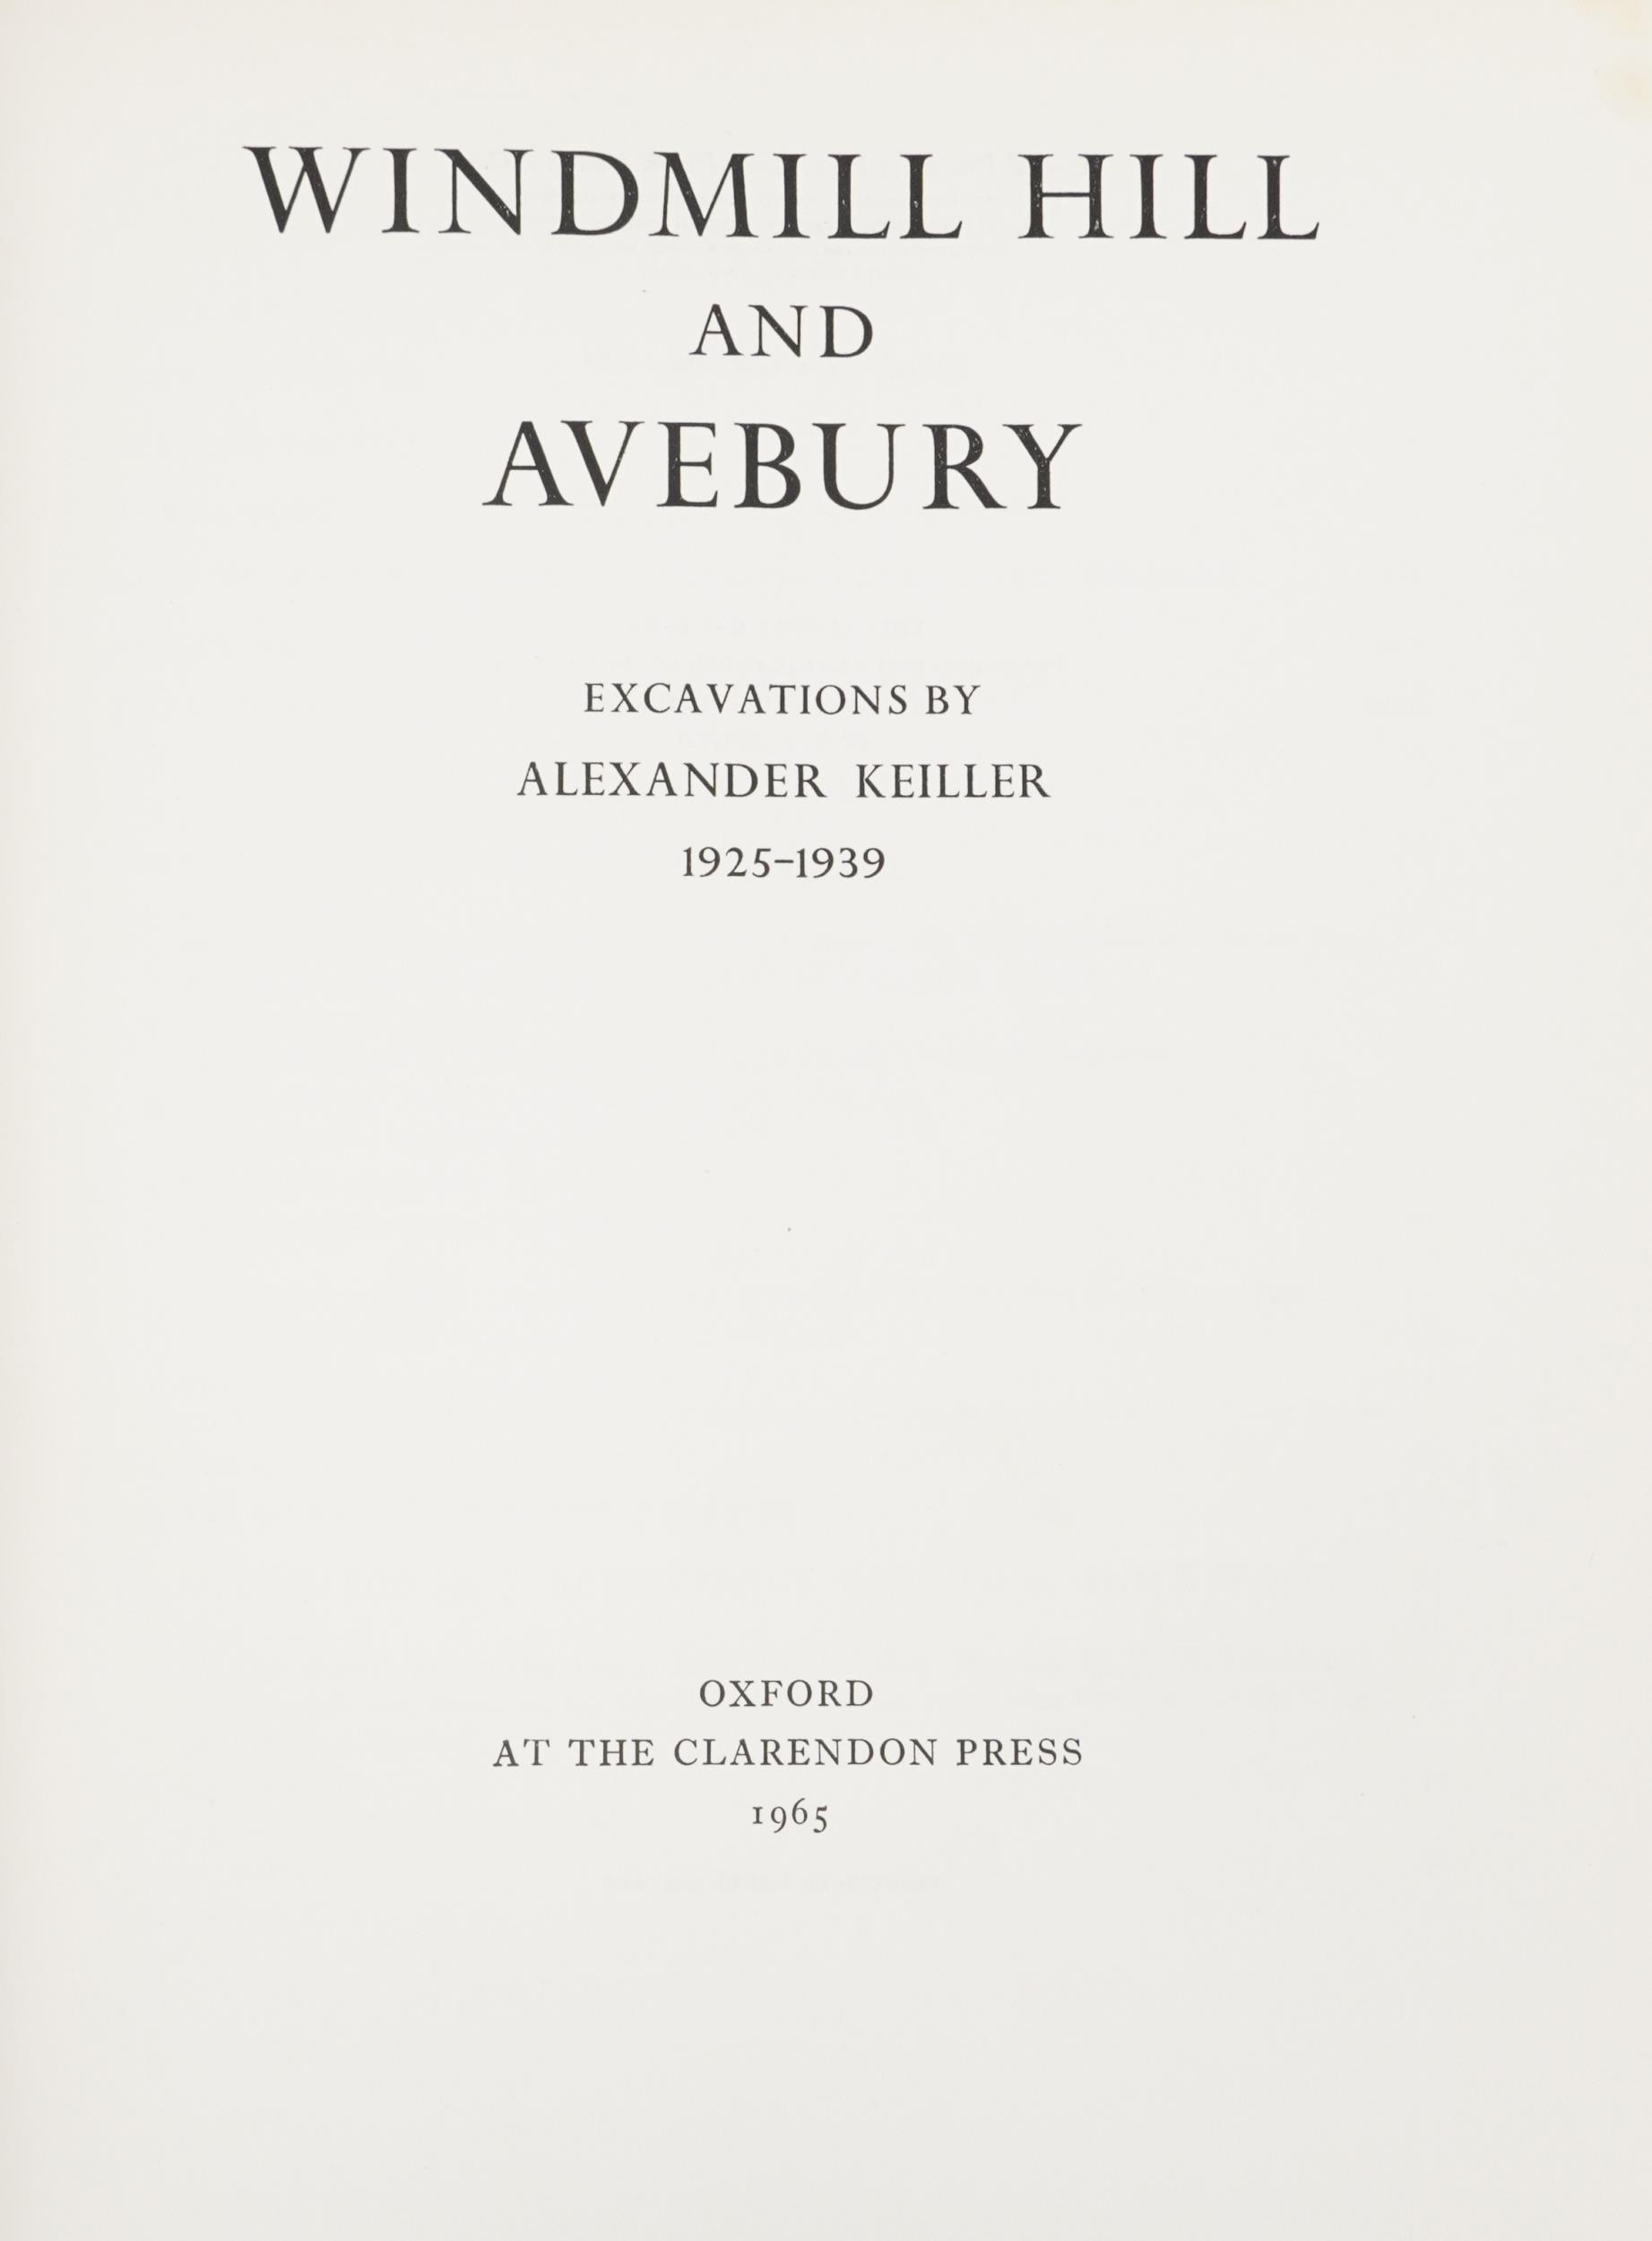 Windmill Hill and Avebury Evacuations, hardback book with dust cover by Alexander Keiller - Image 2 of 3